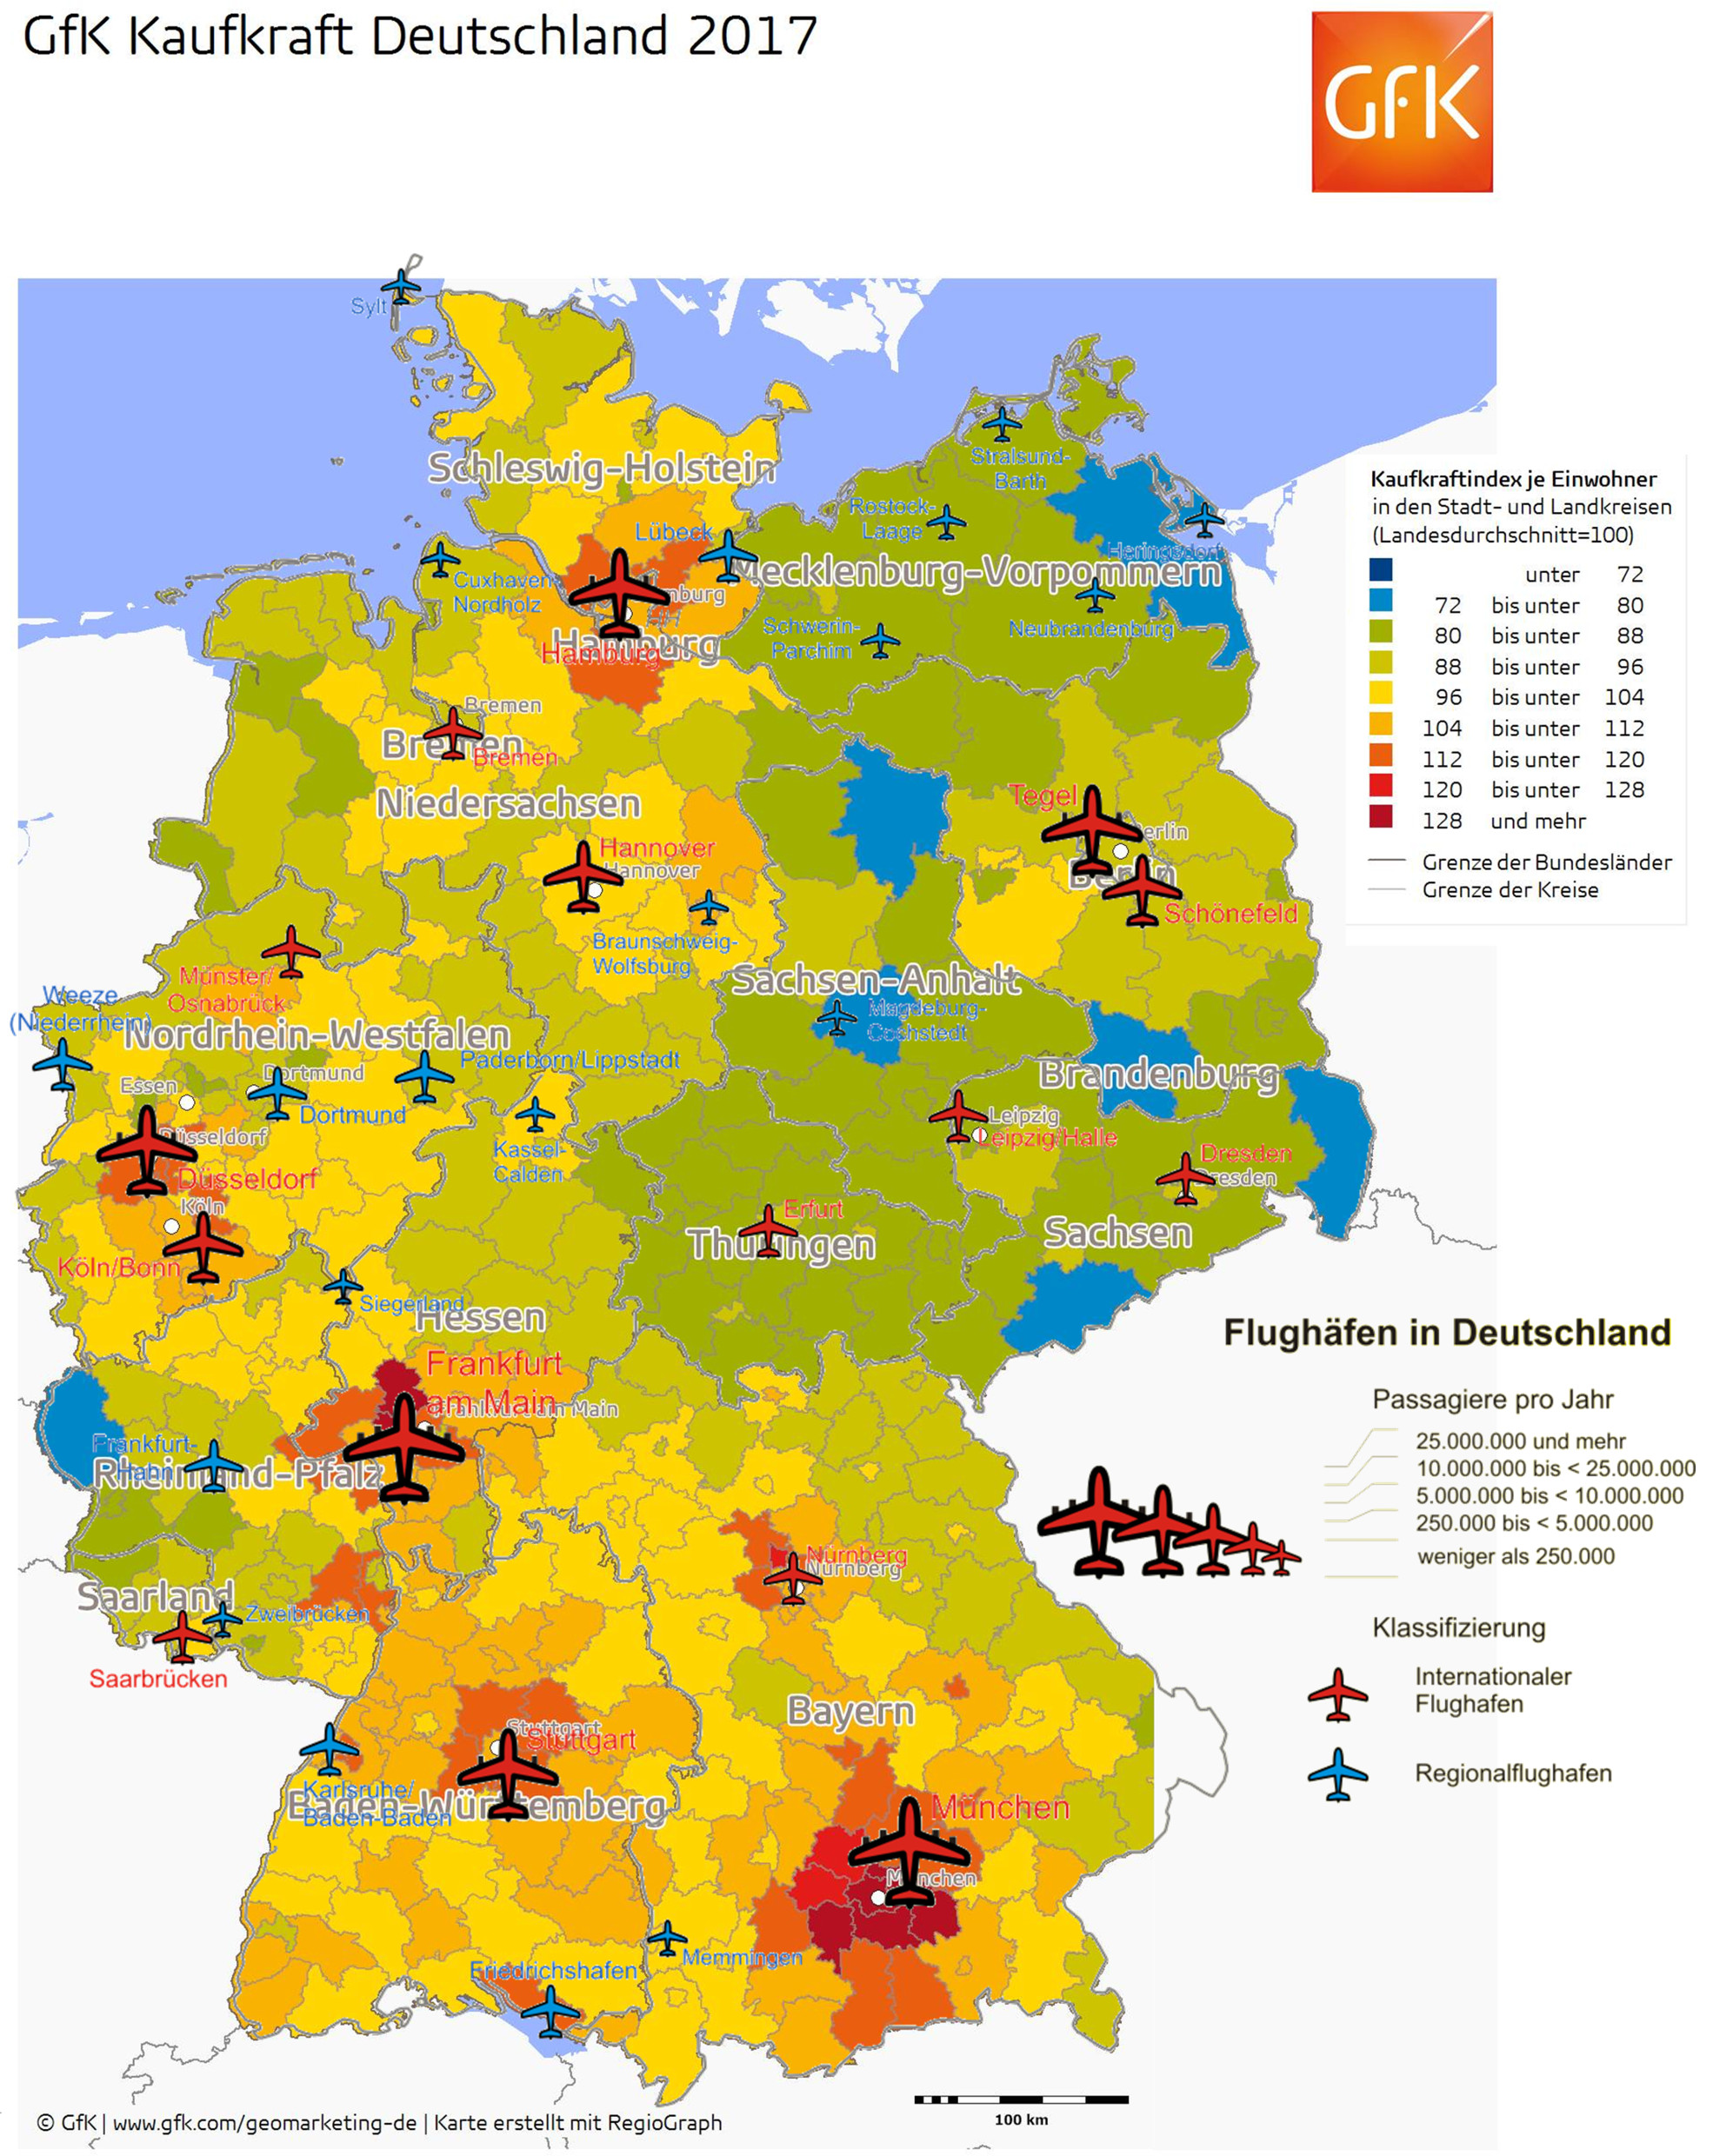 An overlay map of GFK Purchasing Power map Germany with the German airports from Wikipedia.